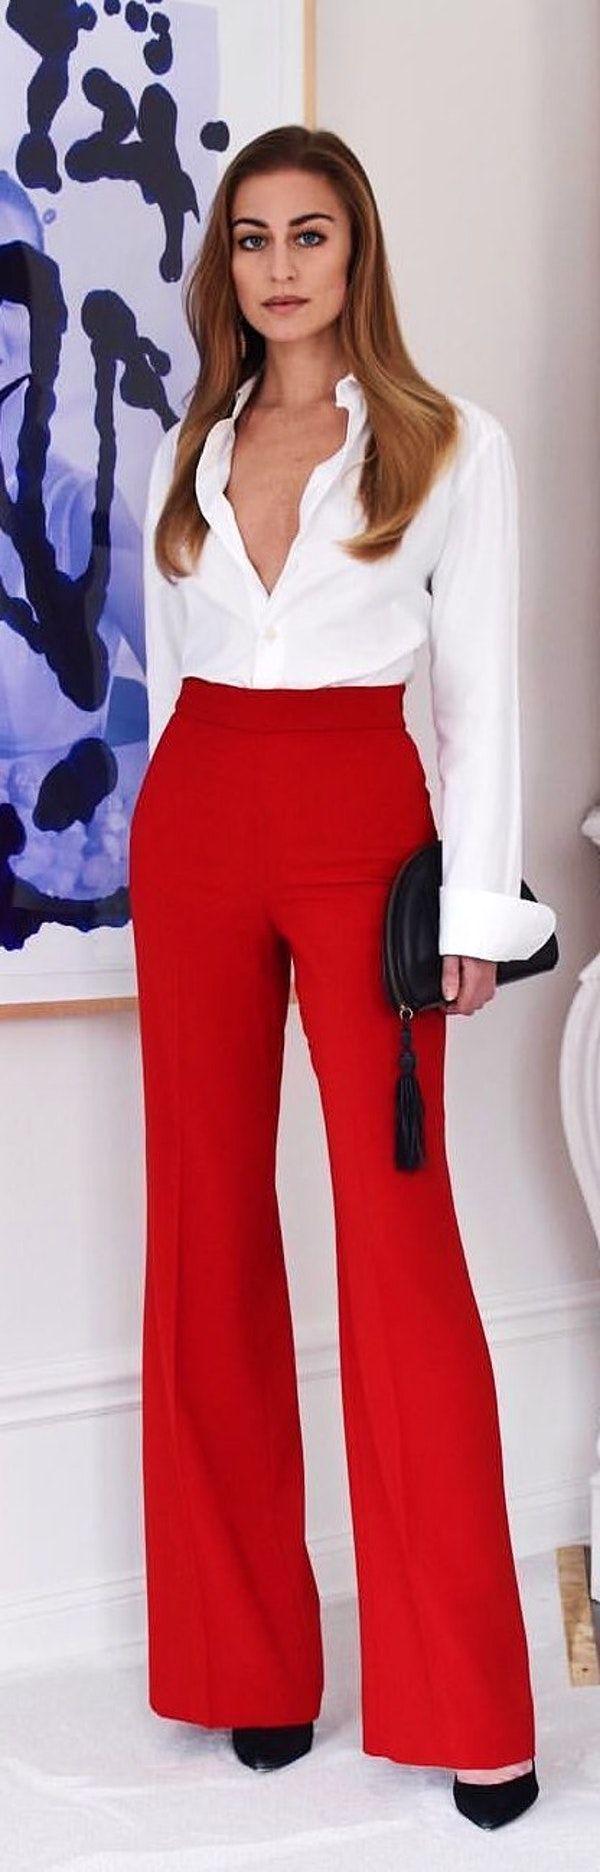 womens red pants outfit